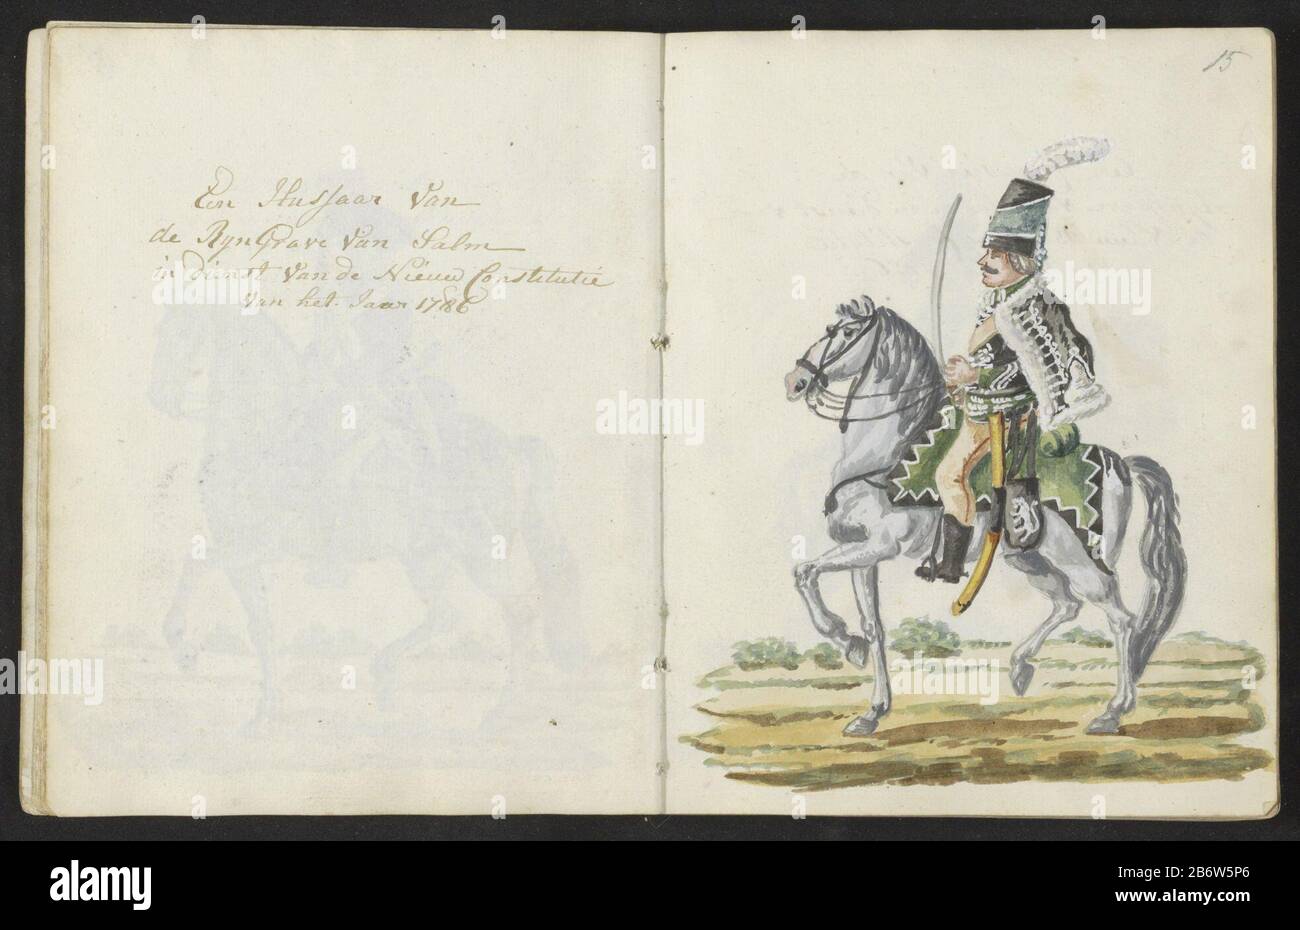 Huzaar van de Rijngraaf van Salm in 1786 Een Hussaar van de RijnGrave van Salm in dienst van de Nieuw Constitutie van het Jaar 1786 (titel op object) the uniform of the hussars of the Rhine Count of Salm in 1786. Part of the second chapter on the new uniforms for the period 1783-1787. In the sketch with color drawings of the uniforms worn by military personnel and members of the schutterij from the period 1770 to 1795-1796. Manufacturer :  draftsman: S.G. Cast Insert preparation: Amsterdam Date: 1795 Physical characteristics: pen in brown ink color material: paper Technique: writing dimensions Stock Photo